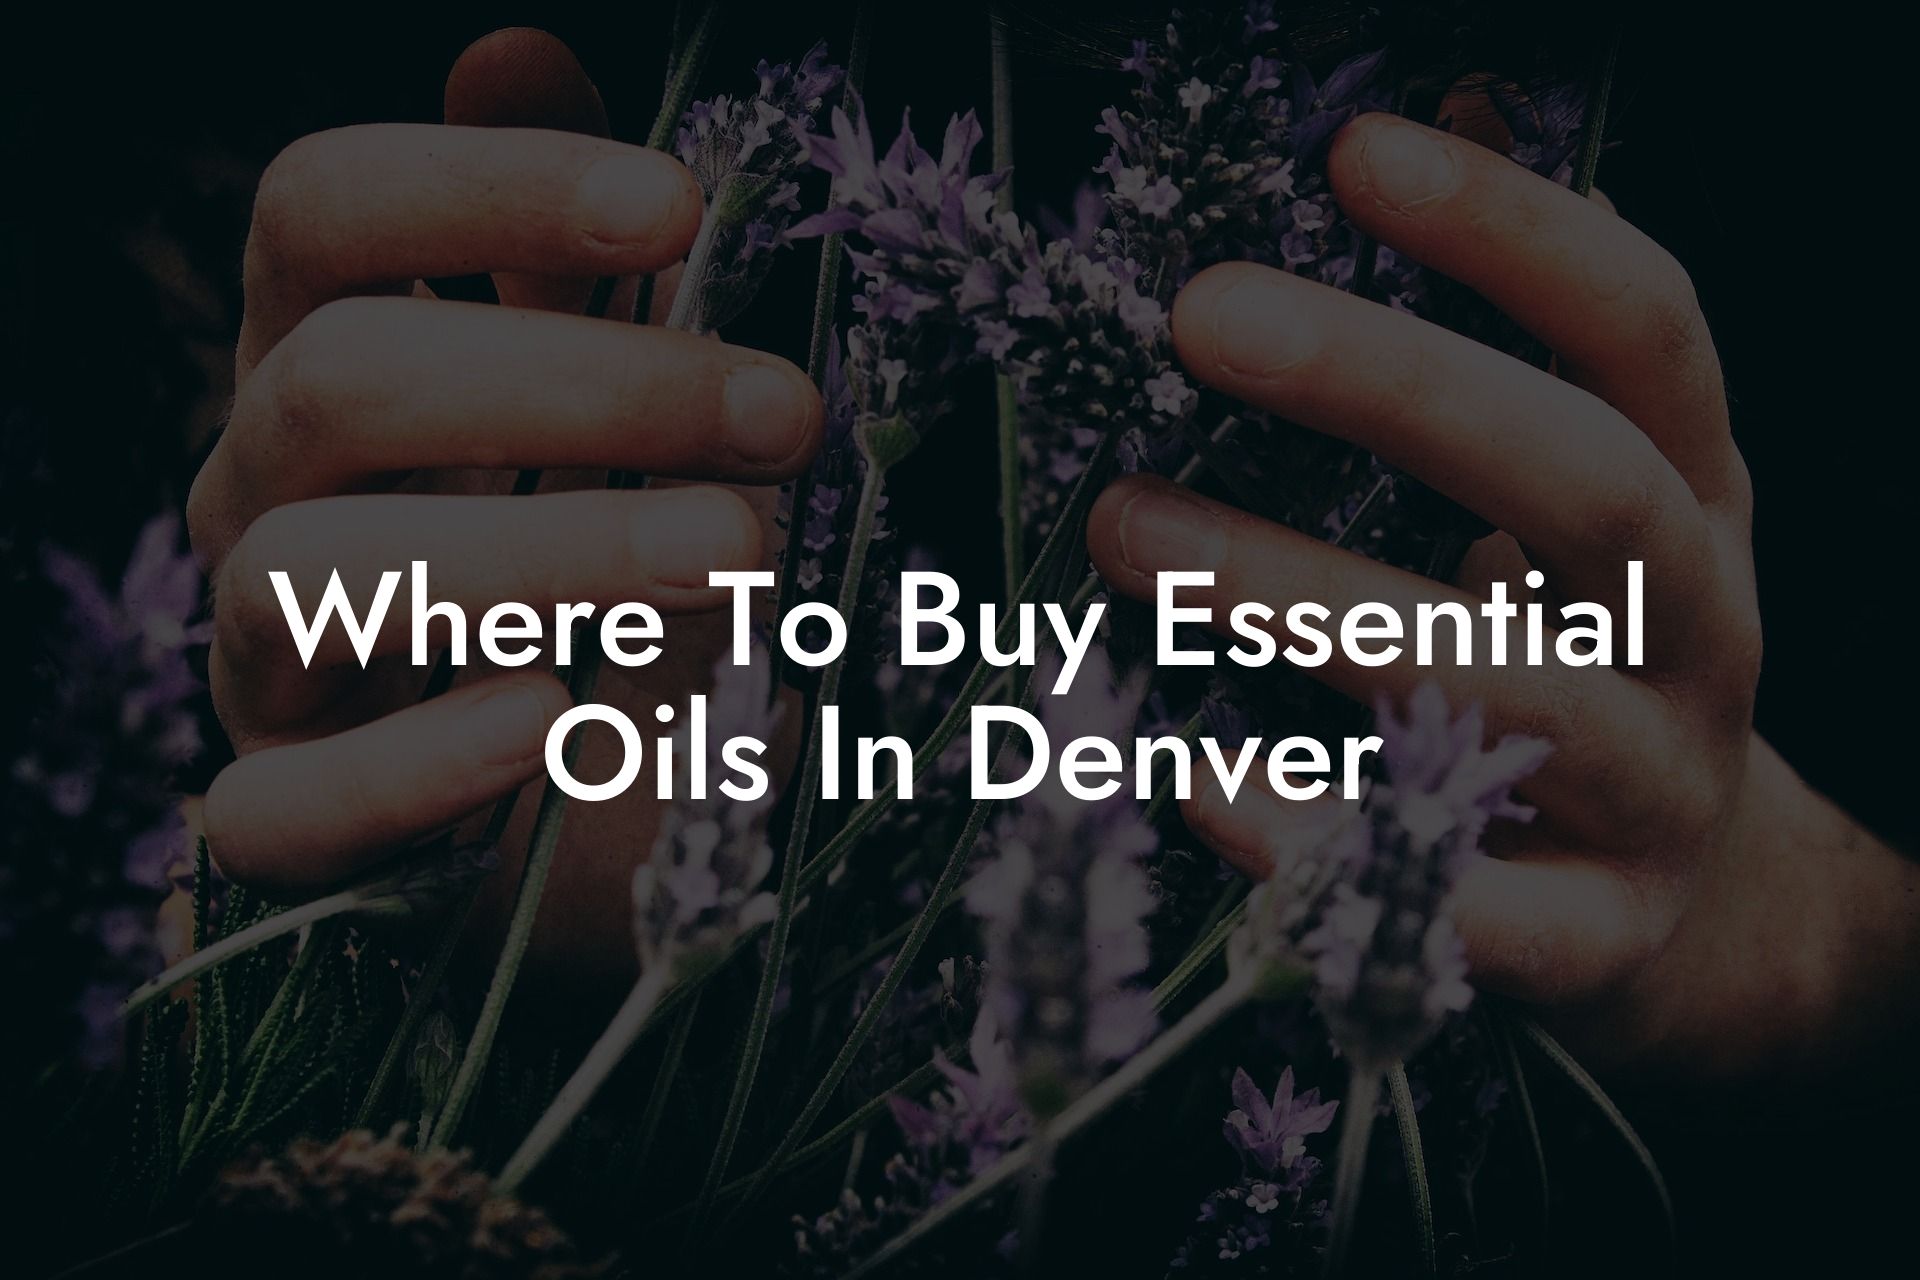 Where To Buy Essential Oils In Denver